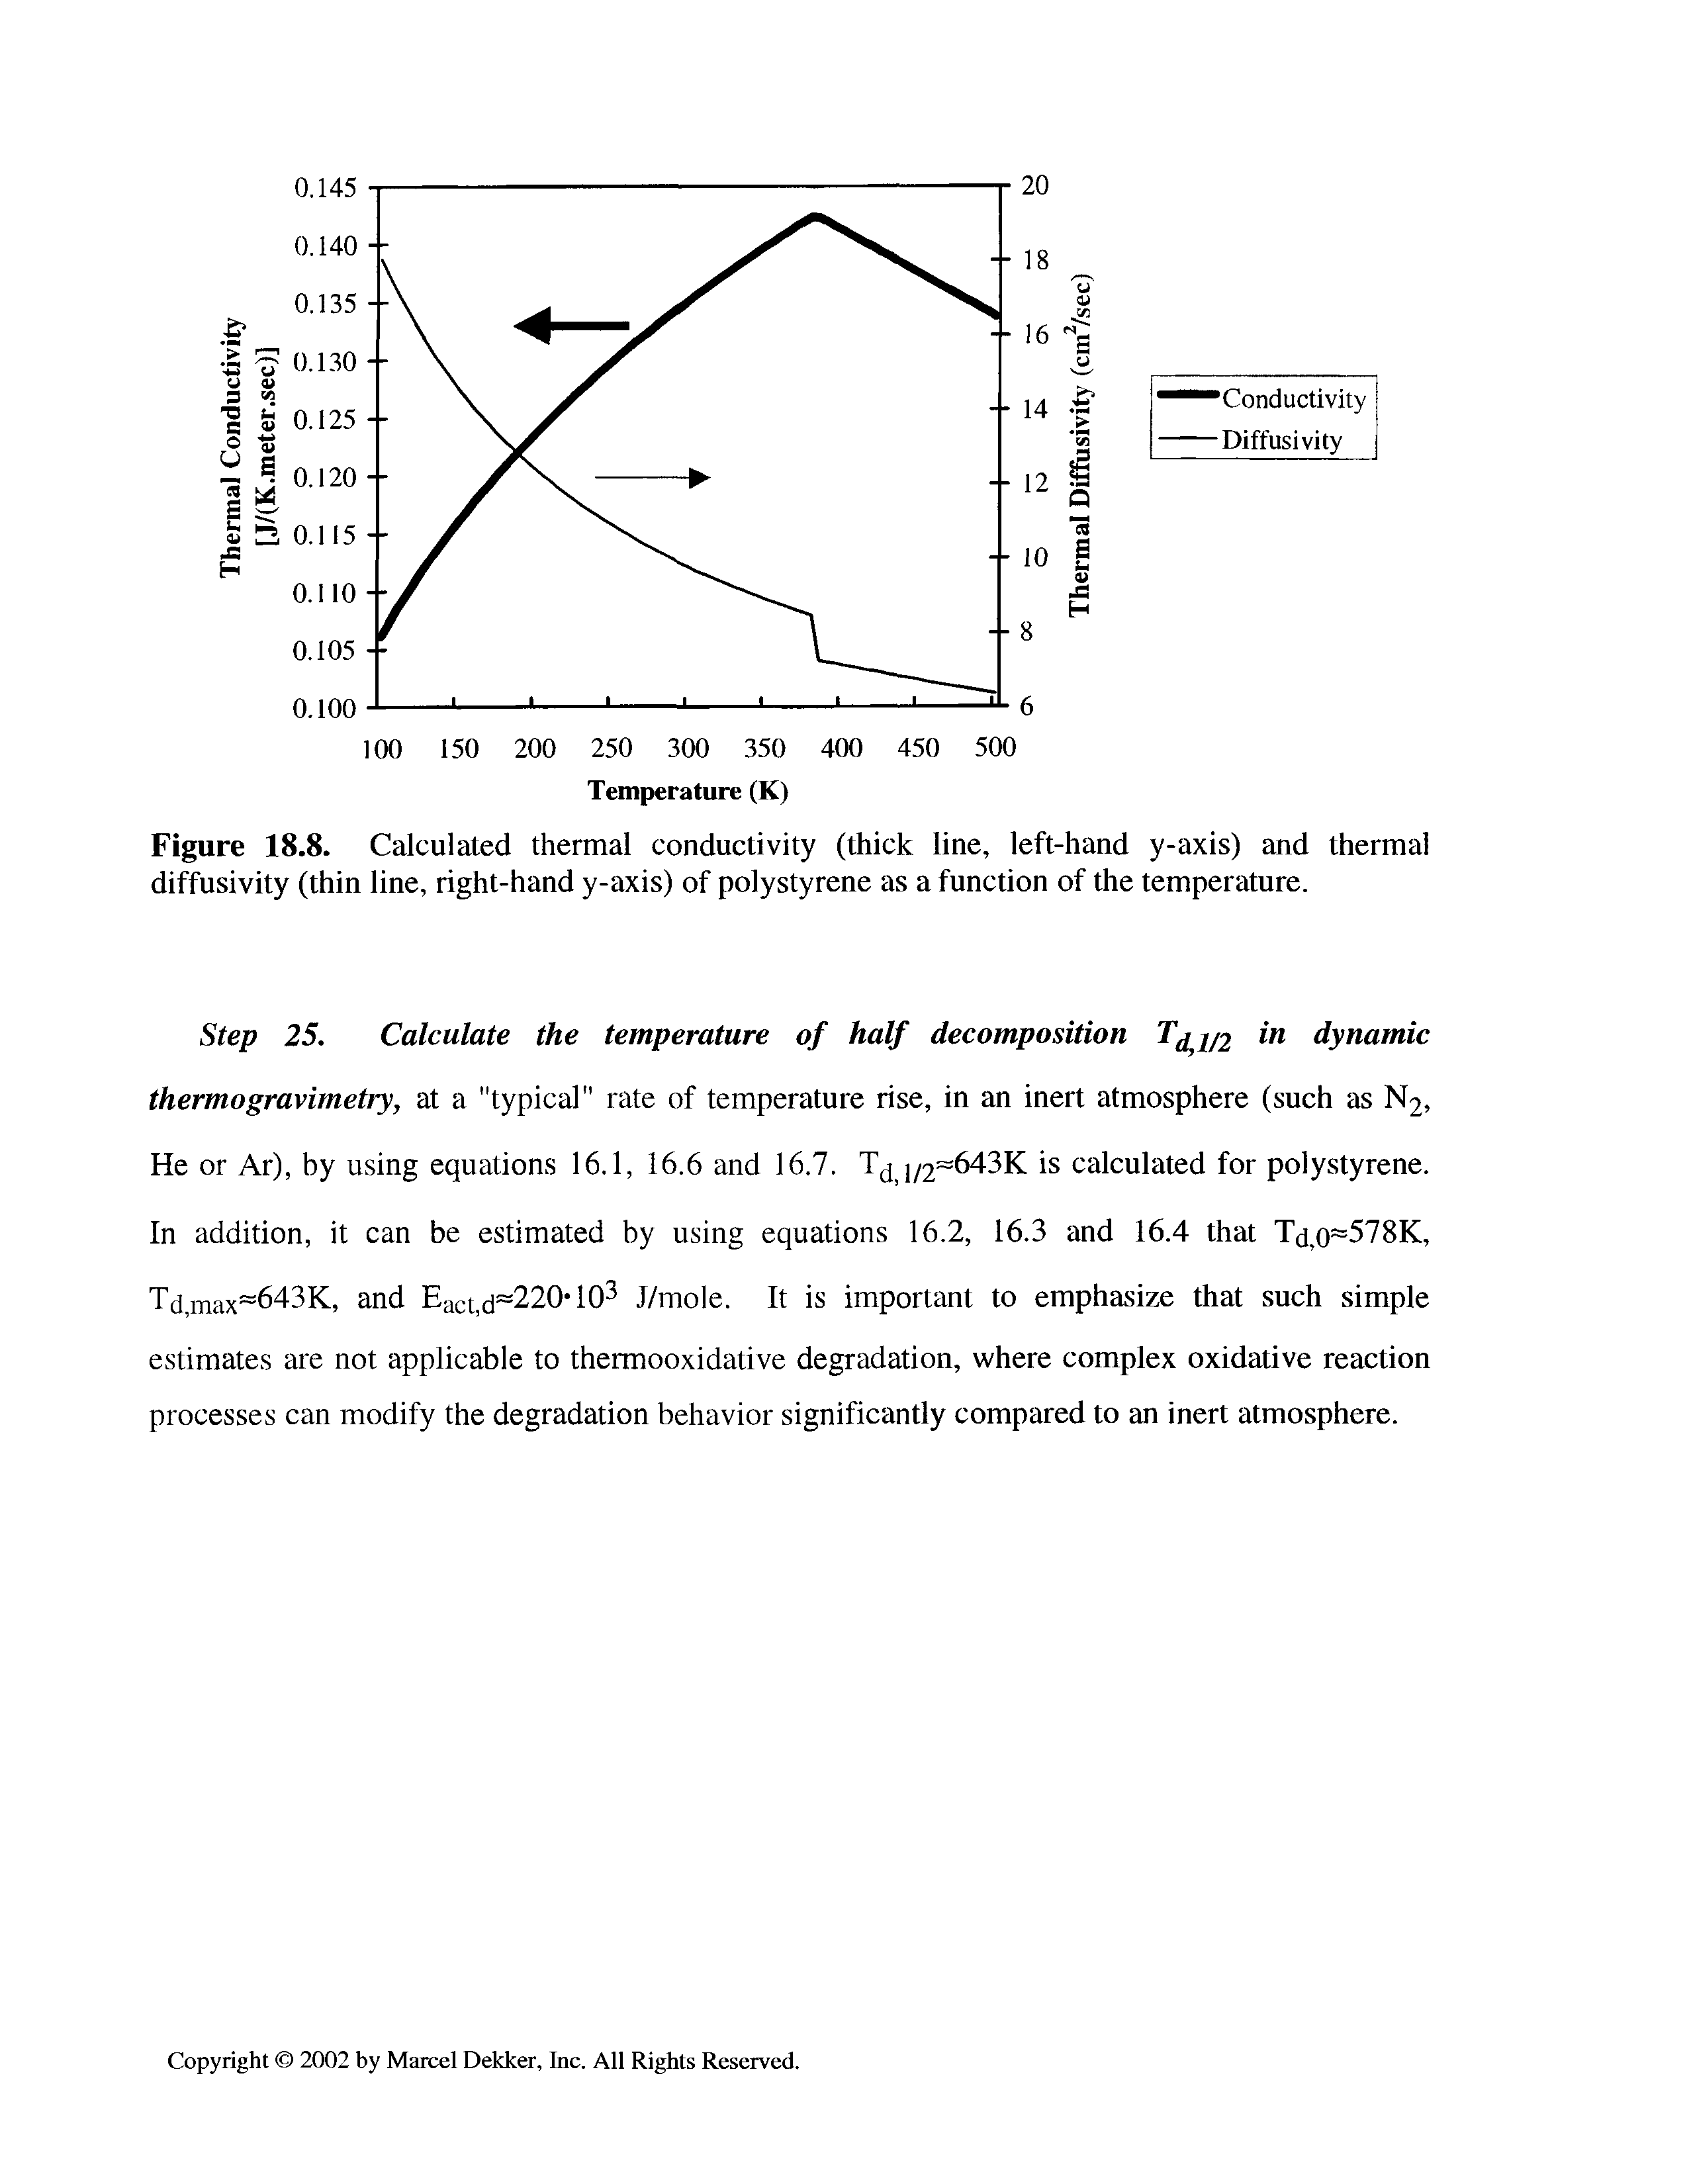 Figure 18.8. Calculated thermal conductivity (thick line, left-hand y-axis) and thermal diffusivity (thin line, right-hand y-axis) of polystyrene as a function of the temperature.